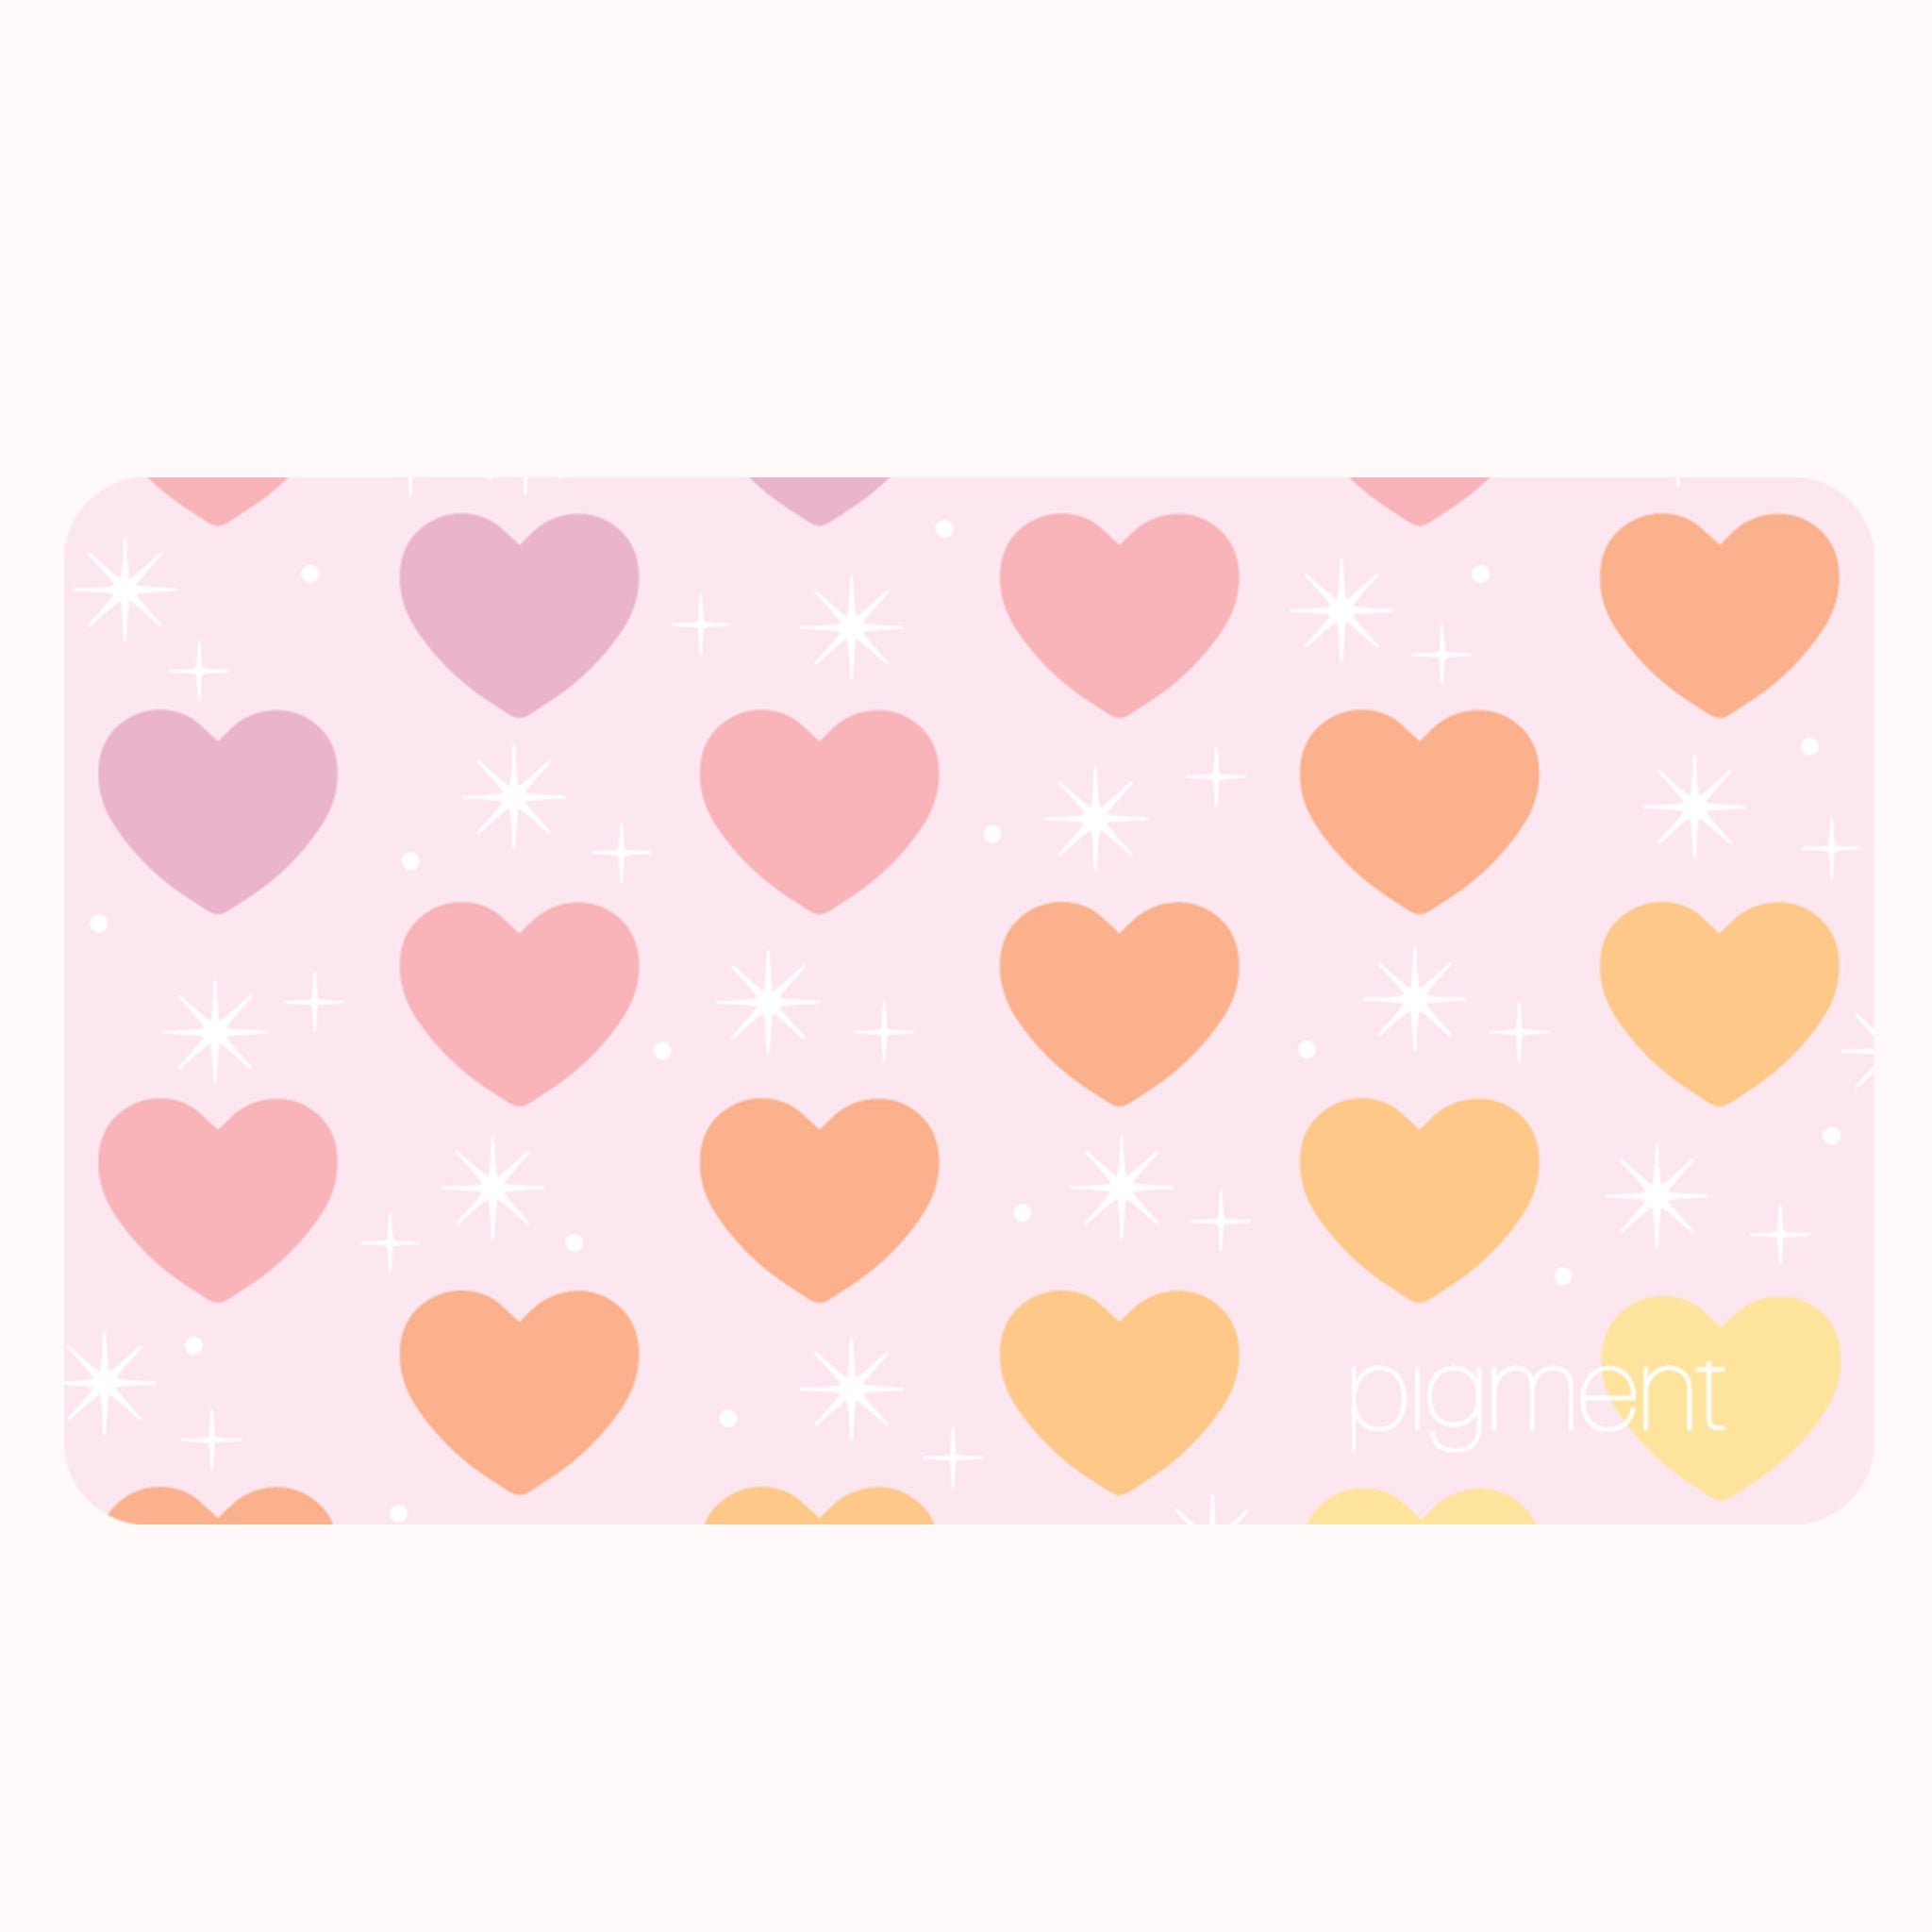 On a white background is a soft pink gift card with multicolored hearts and white detail sparkles along with white small text in the bottom right corner that reads, "Pigment".